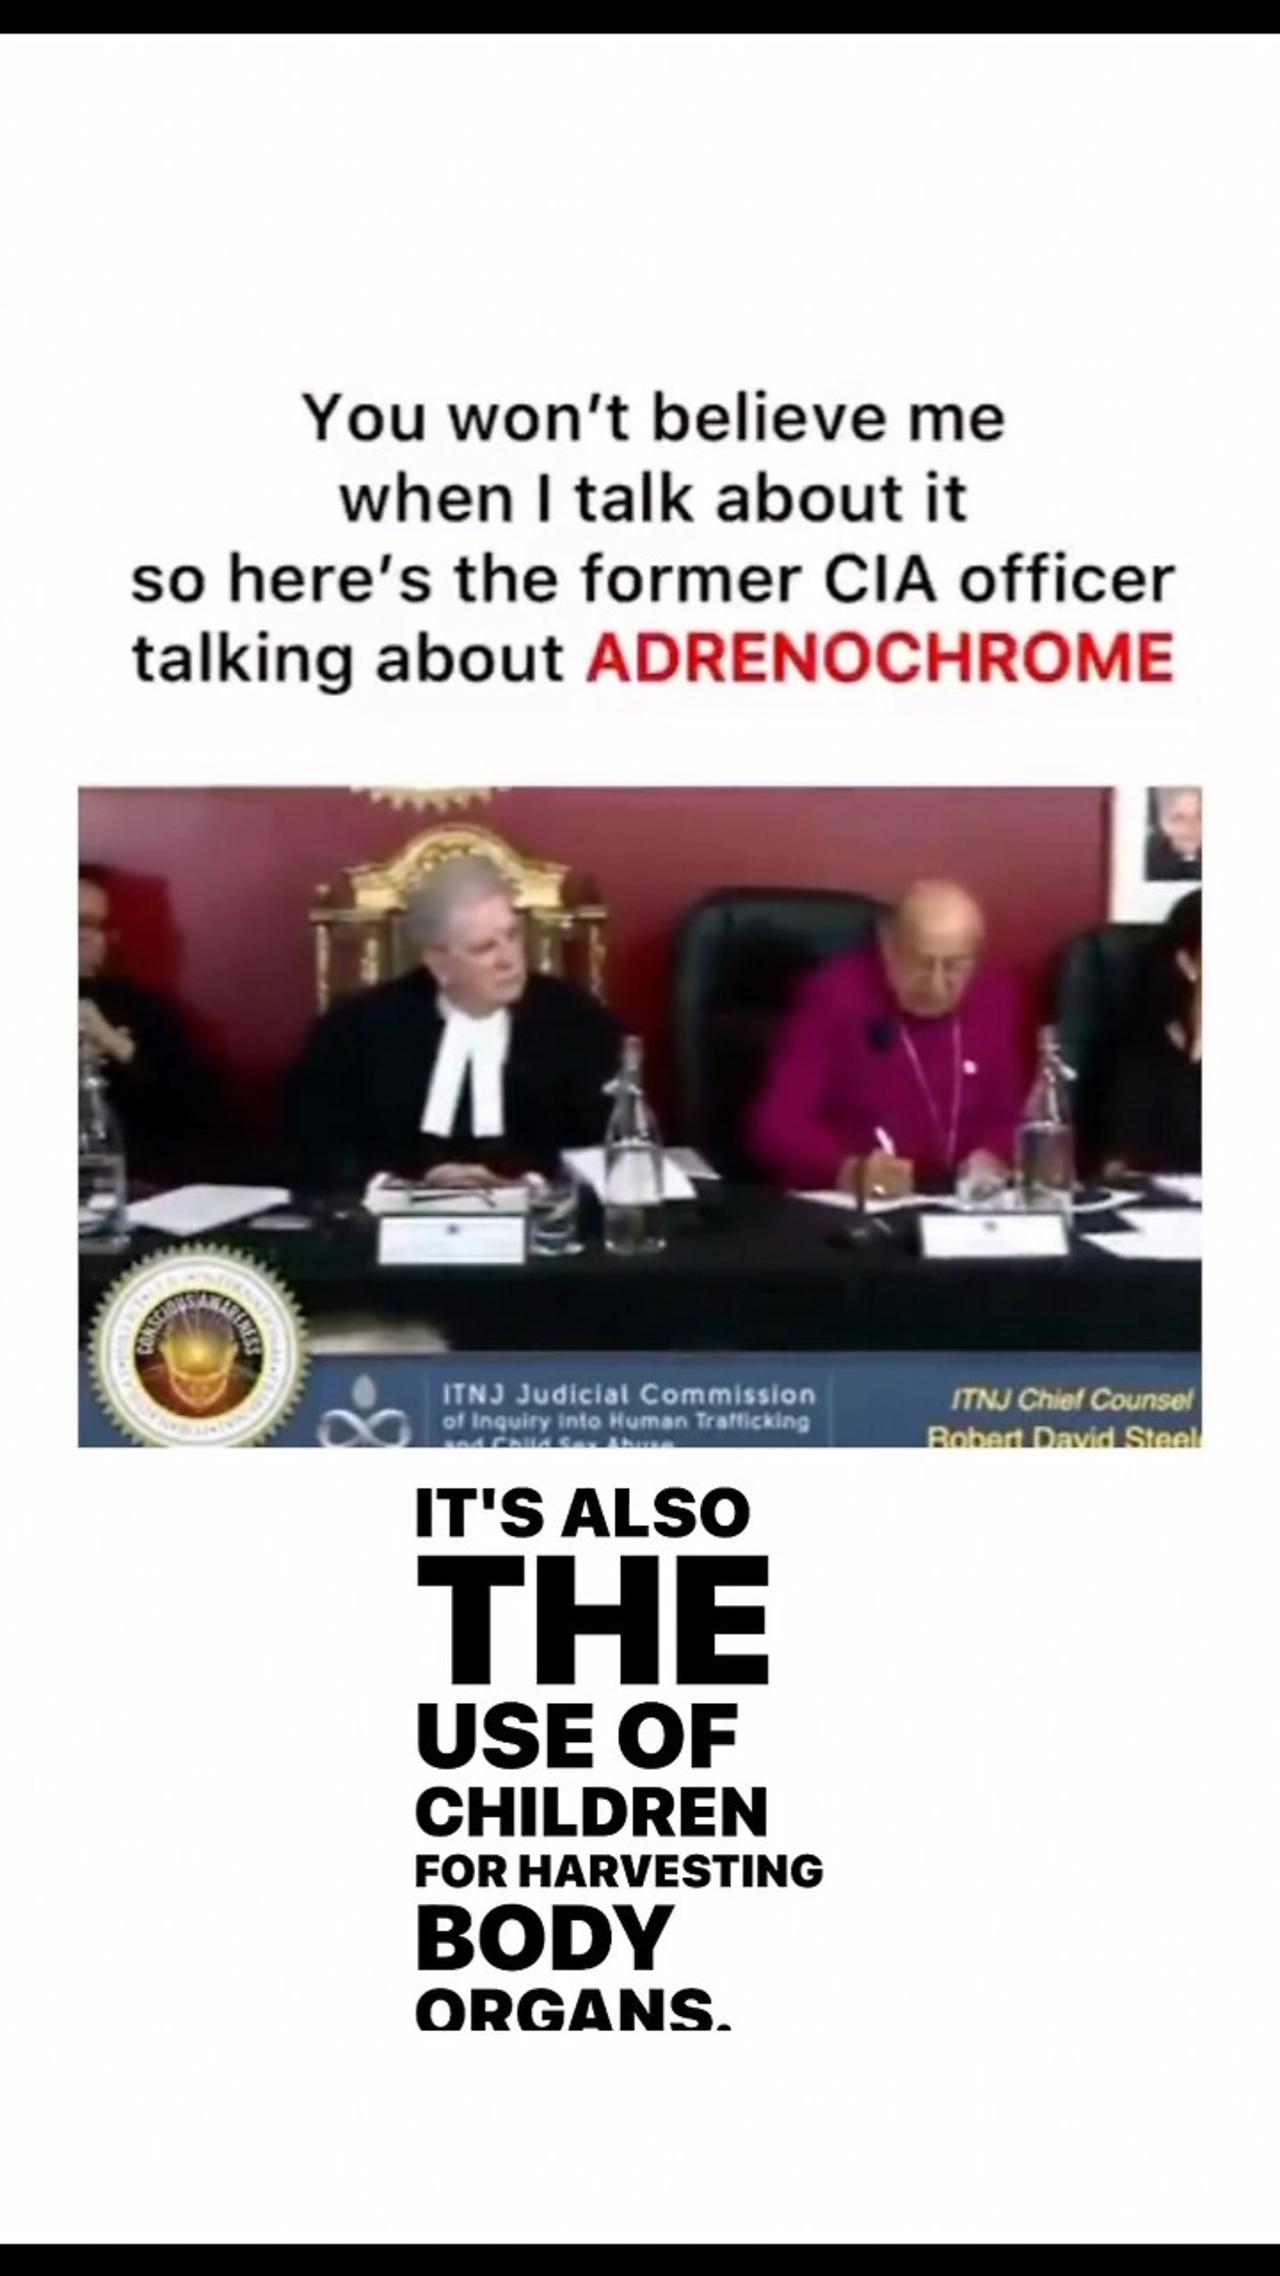 FORMER CIA OFFICER TALKING ABOUT ADRENOCHROME